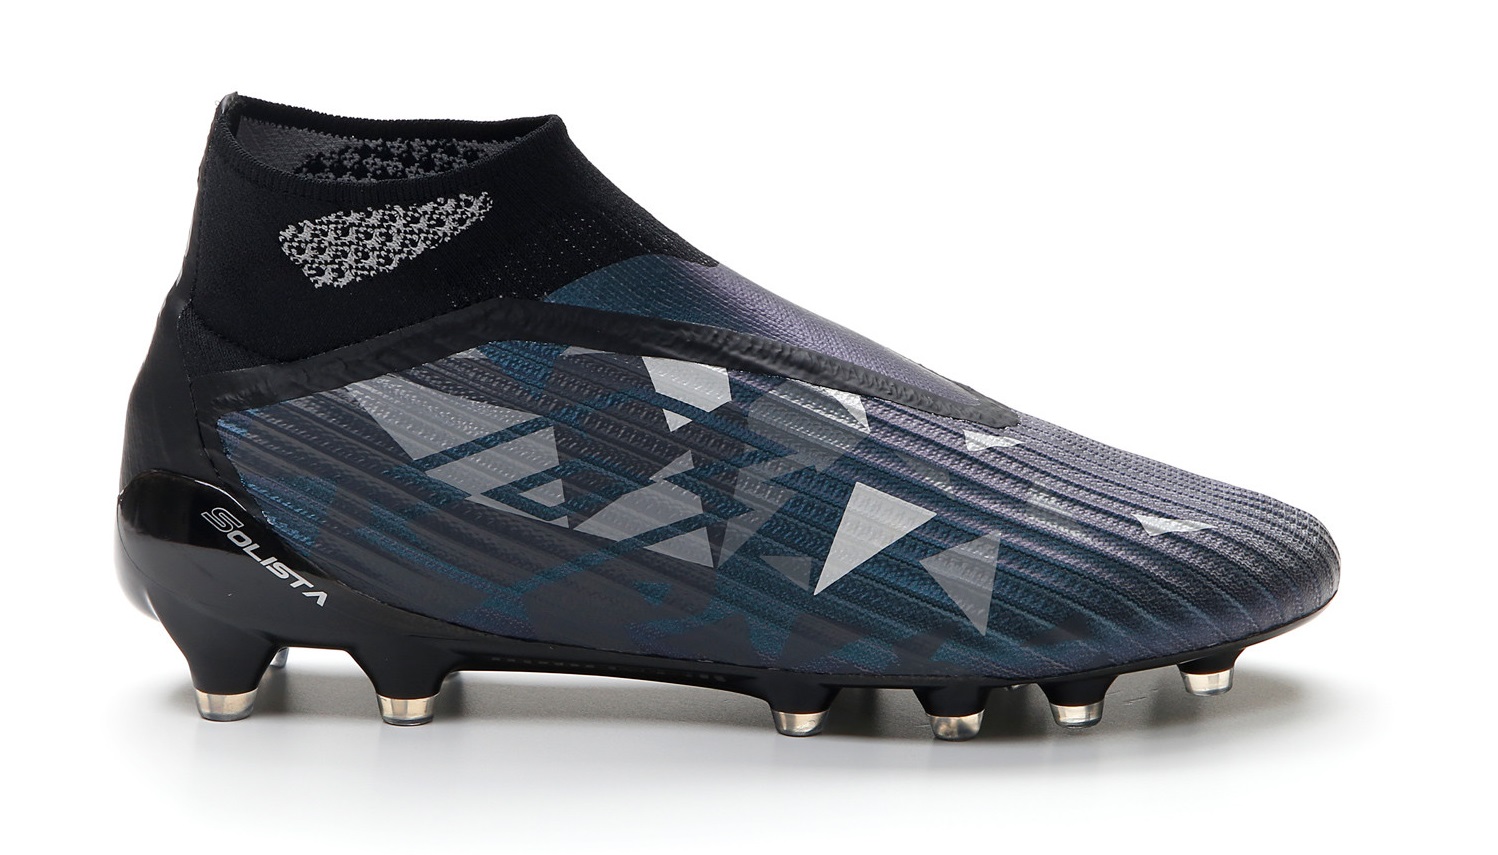 Lotto Release Next Generation Solista 100 IV "GRAVITY" - Soccer Cleats 101